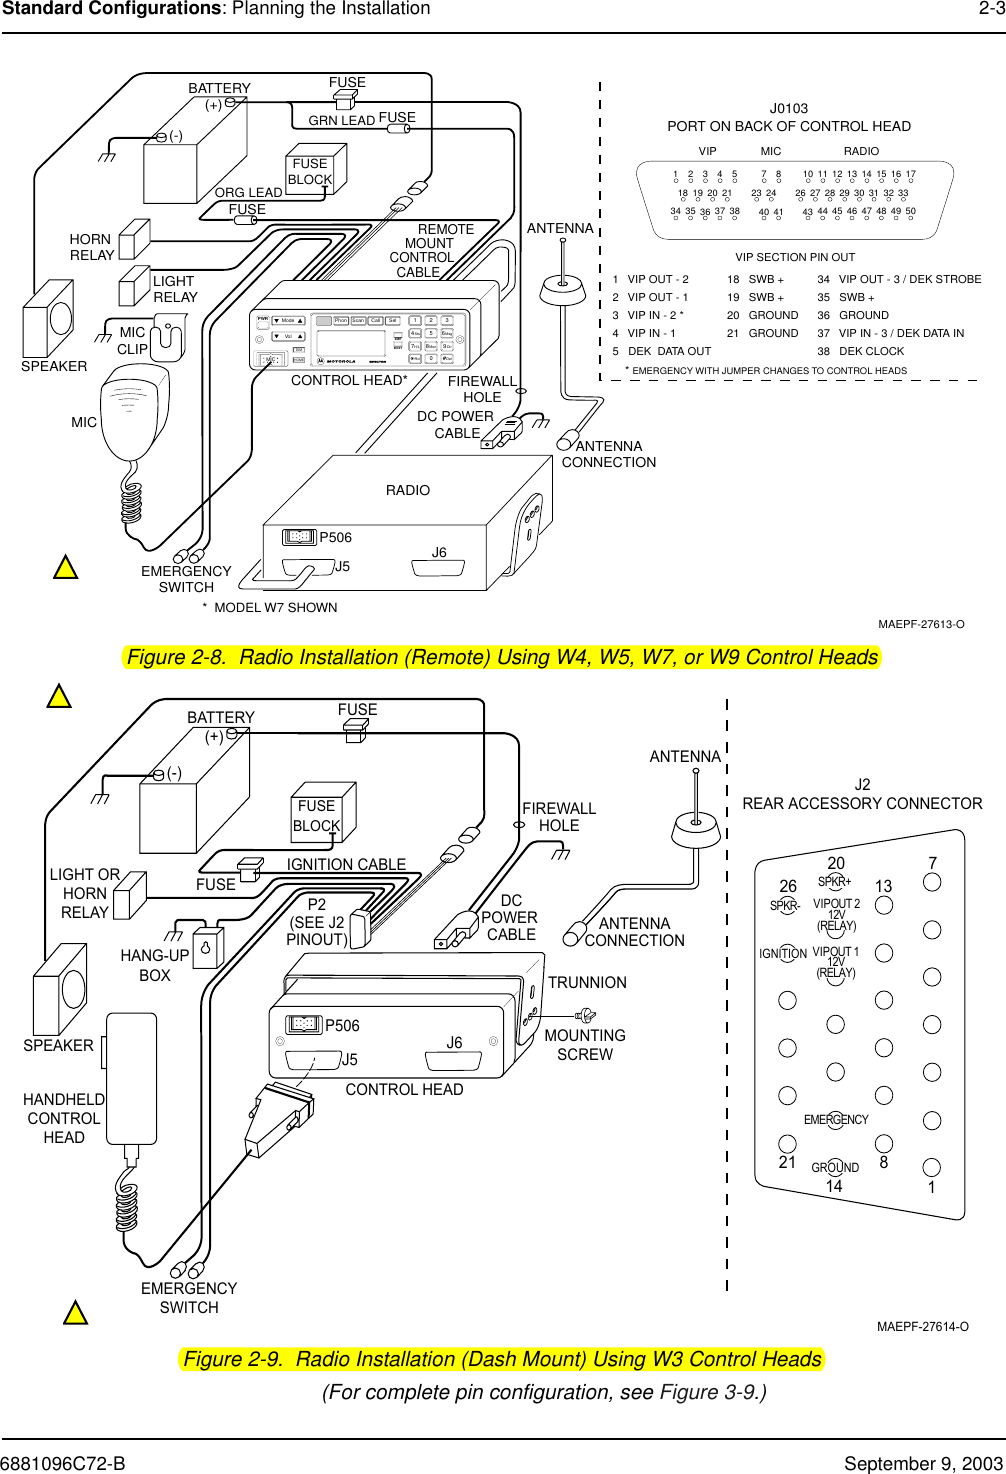 6881096C72-B September 9, 2003Standard Configurations: Planning the Installation 2-3Figure 2-8.  Radio Installation (Remote) Using W4, W5, W7, or W9 Control HeadsFigure 2-9.  Radio Installation (Dash Mount) Using W3 Control Heads(For complete pin configuration, see Figure 3-9.)PWRMode ScanPhon SelCallVolDIMHOMEXMITBUSY12345678 90Sts MsgH/L Mon DirRcl DelMICBATTERYHORN RELAYLIGHT RELAYMICCLIPSPEAKERMICEMERGENCYSWITCHGRN LEADFUSEBLOCKORG LEAD(+)(-)FUSEFUSE               REMOTE      MOUNT     CONTROL   CABLECONTROL HEAD**  MODEL W7 SHOWNMAEPF-27613-O12345 78101112 13 14 15 16 171918 20 21 23 24 26 27 28 29 30 31 32 3334 35 36 37 38 40 41 43 44 45 46 47 48 49 50VIP MIC RADIOVIP SECTION PIN OUT1   VIP OUT - 22   VIP OUT - 13   VIP IN - 2 *4   VIP IN - 15   DEK  DATA OUT    * EMERGENCY WITH JUMPER CHANGES TO CONTROL HEADS18   SWB +19   SWB +20   GROUND21   GROUND34   VIP OUT - 3 / DEK STROBE35   SWB +36   GROUND37   VIP IN - 3 / DEK DATA IN38   DEK CLOCKJ0103PORT ON BACK OF CONTROL HEADFIREWALLHOLEANTENNA CONNECTION ANTENNADC POWER CABLERADIOJ5P506 J6FUSEBATTERYLIGHT ORHORNRELAYSPEAKEREMERGENCYSWITCHFUSEBLOCK(+)(-)FUSEFIREWALLHOLEMOUNTINGSCREWCONTROL HEADANTENNA CONNECTION IGNITION CABLEDCPOWER CABLETRUNNIONHANG-UPBOXHANDHELDCONTROLHEADFUSEANTENNAMAEPF-27614-OJ2REAR ACCESSORY CONNECTORP2(SEE J2PINOUT)1781413202126SPKR-SPKR+VIPOUT 212V(RELAY)VIPOUT 112V(RELAY)GROUNDEMERGENCYIGNITIONJ5P506 J6